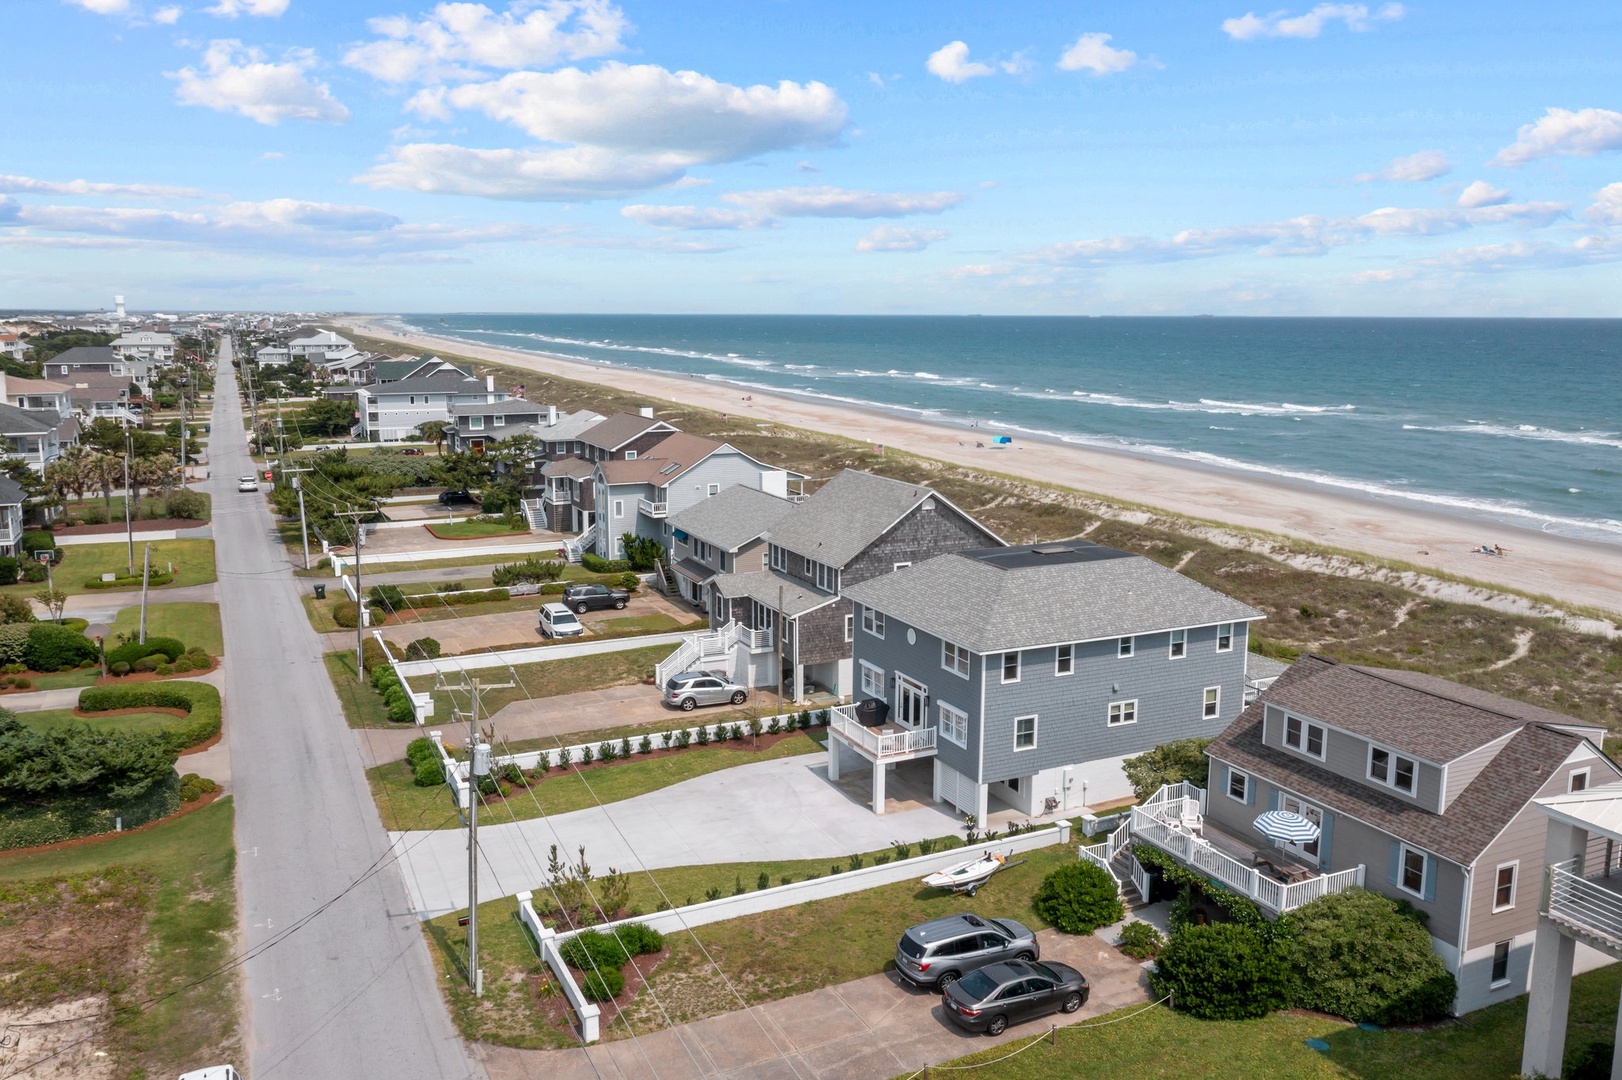 Aerial view of the House & Ocean